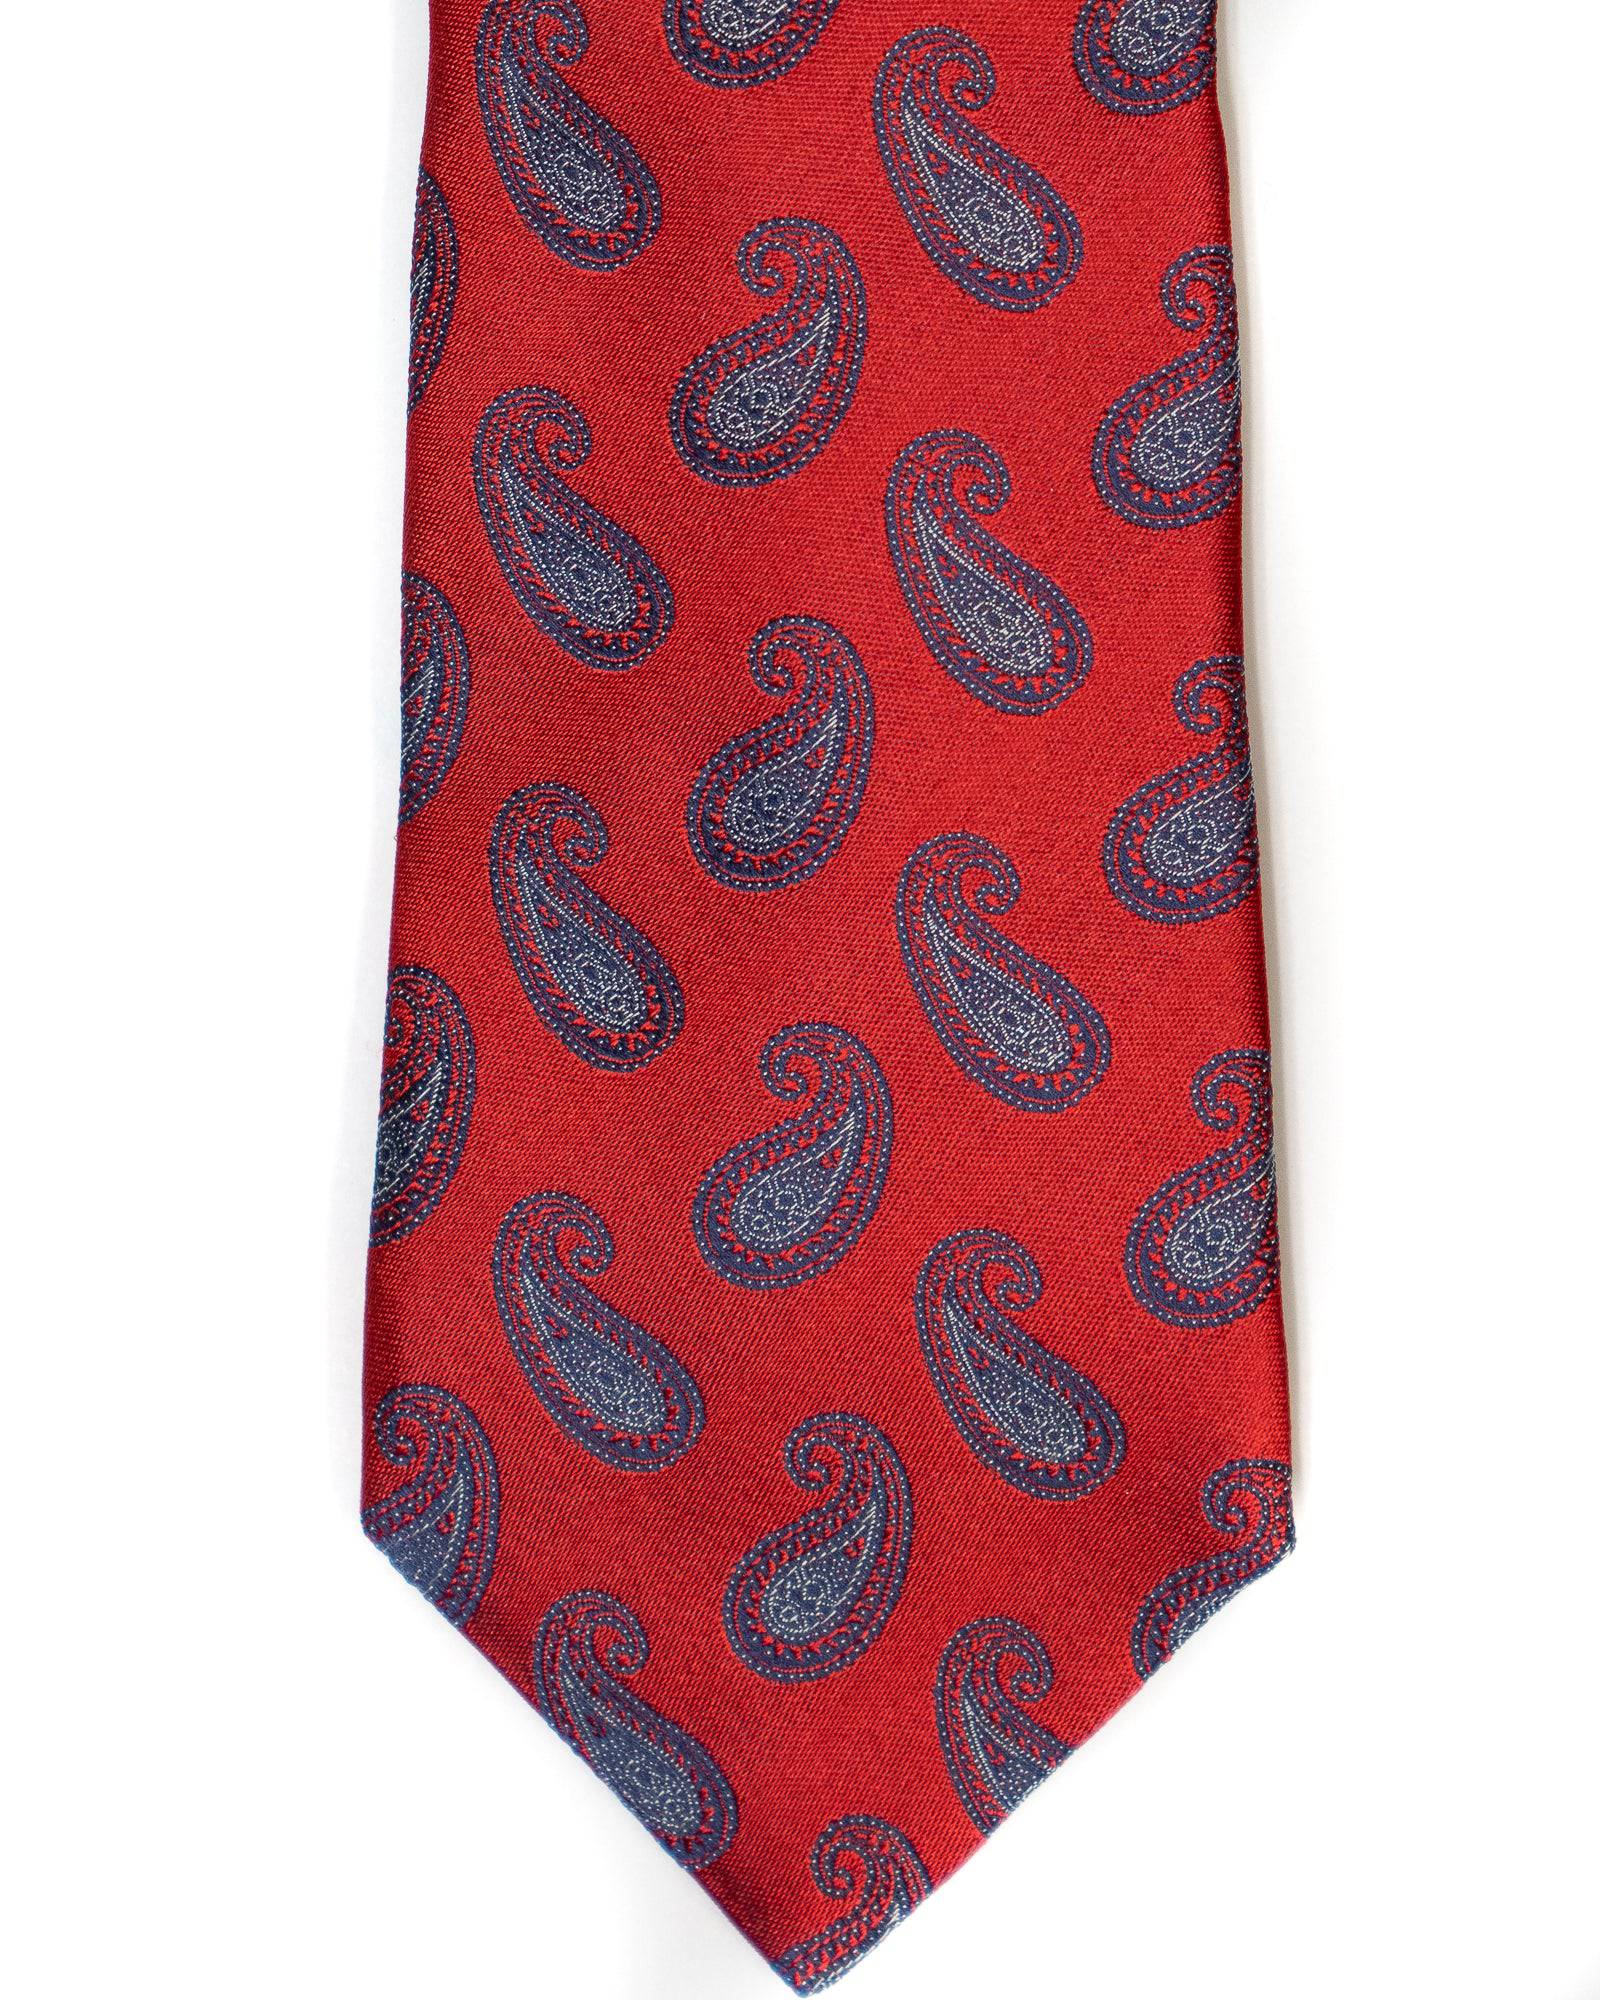 Paisley Silk Tie in Red With Blue - Rainwater's Men's Clothing and Tuxedo Rental